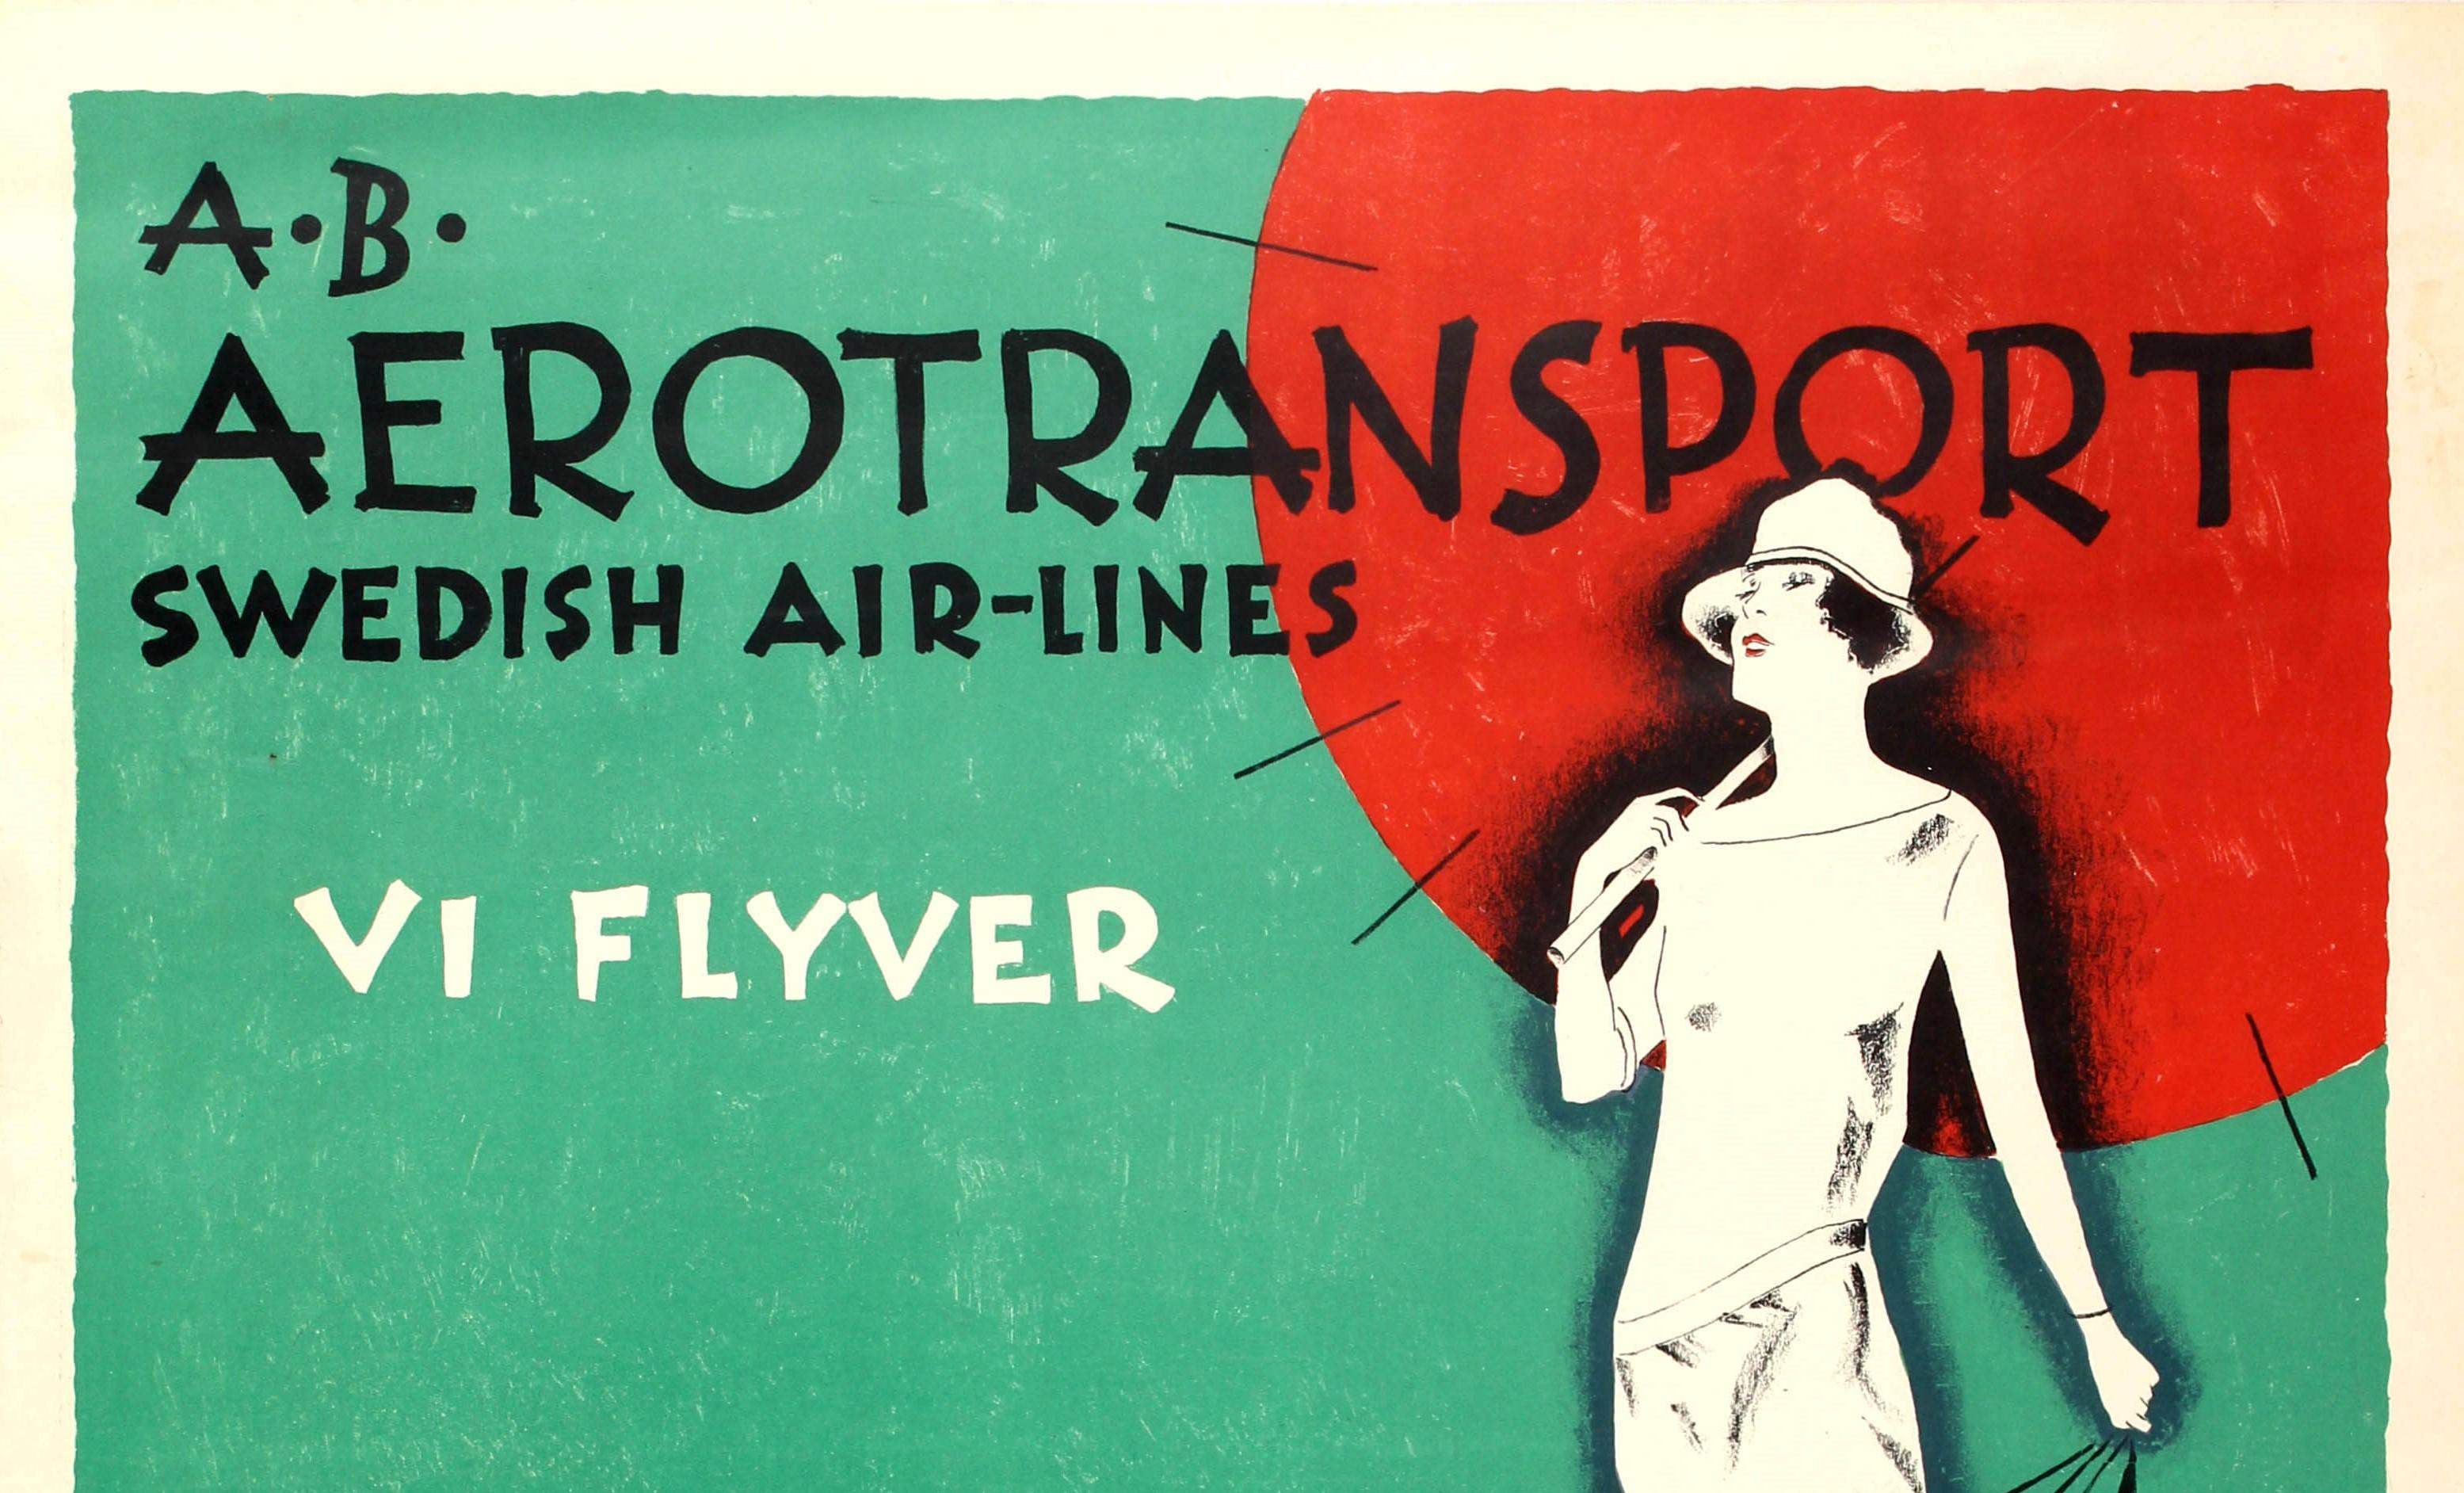 Original vintage travel advertising poster: A.B. Aerotransport Swedish Air-Lines VI Flyver. Great image by Ernst Mentze showing an elegant lady wearing a fashionable dress and hat, holding a large red umbrella in one hand and three planes on leashes